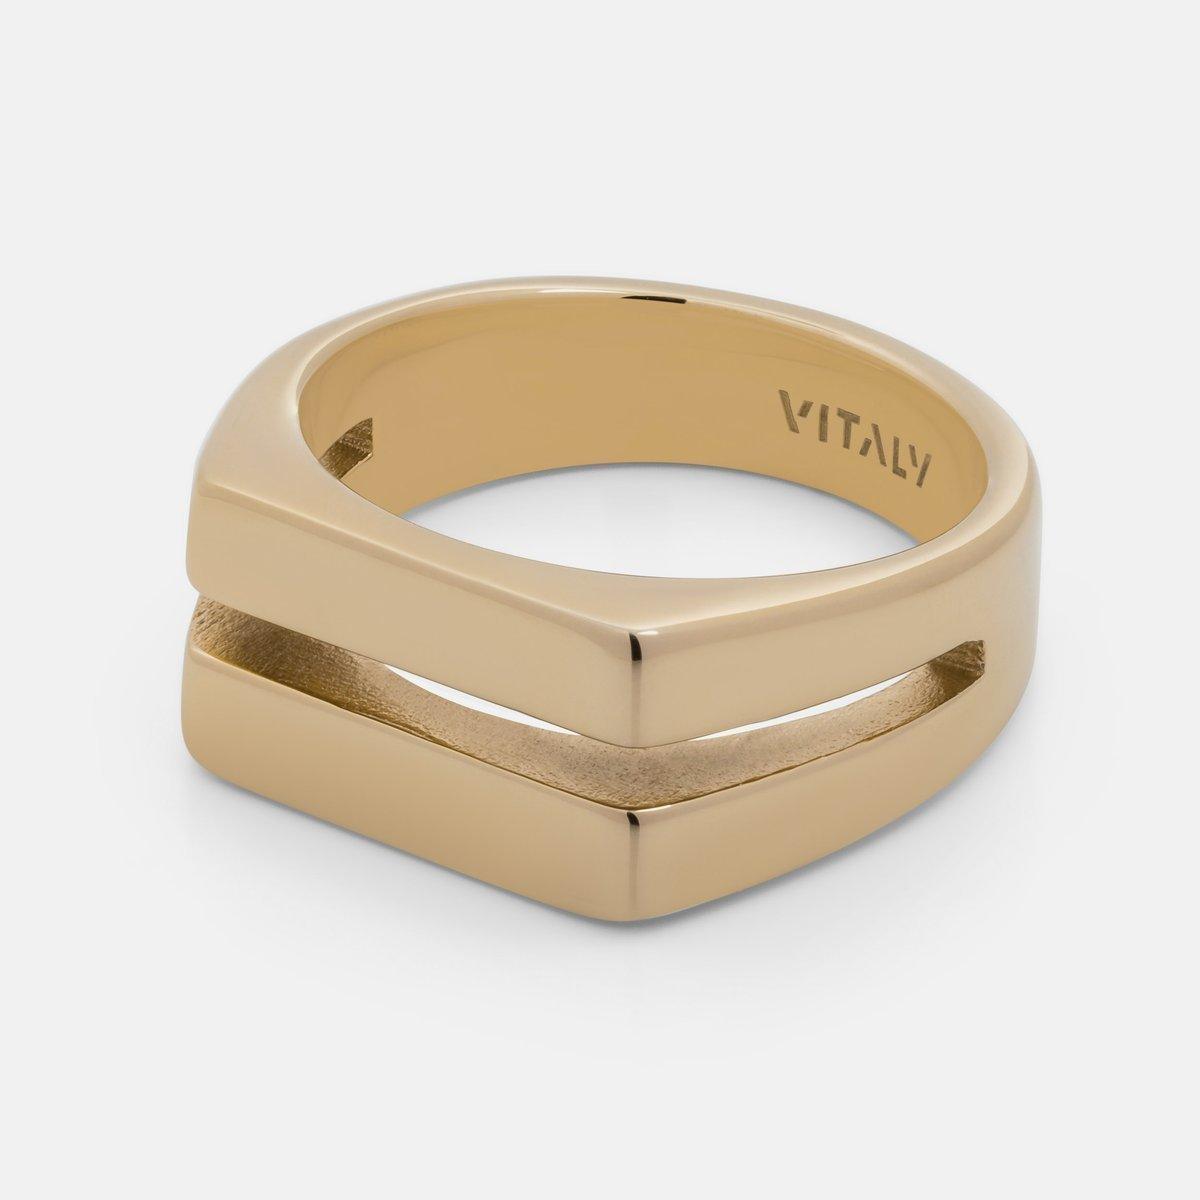 VITALY Divide Stainless Steel Gold Ring - SUPERCONSCIOUS BERLIN